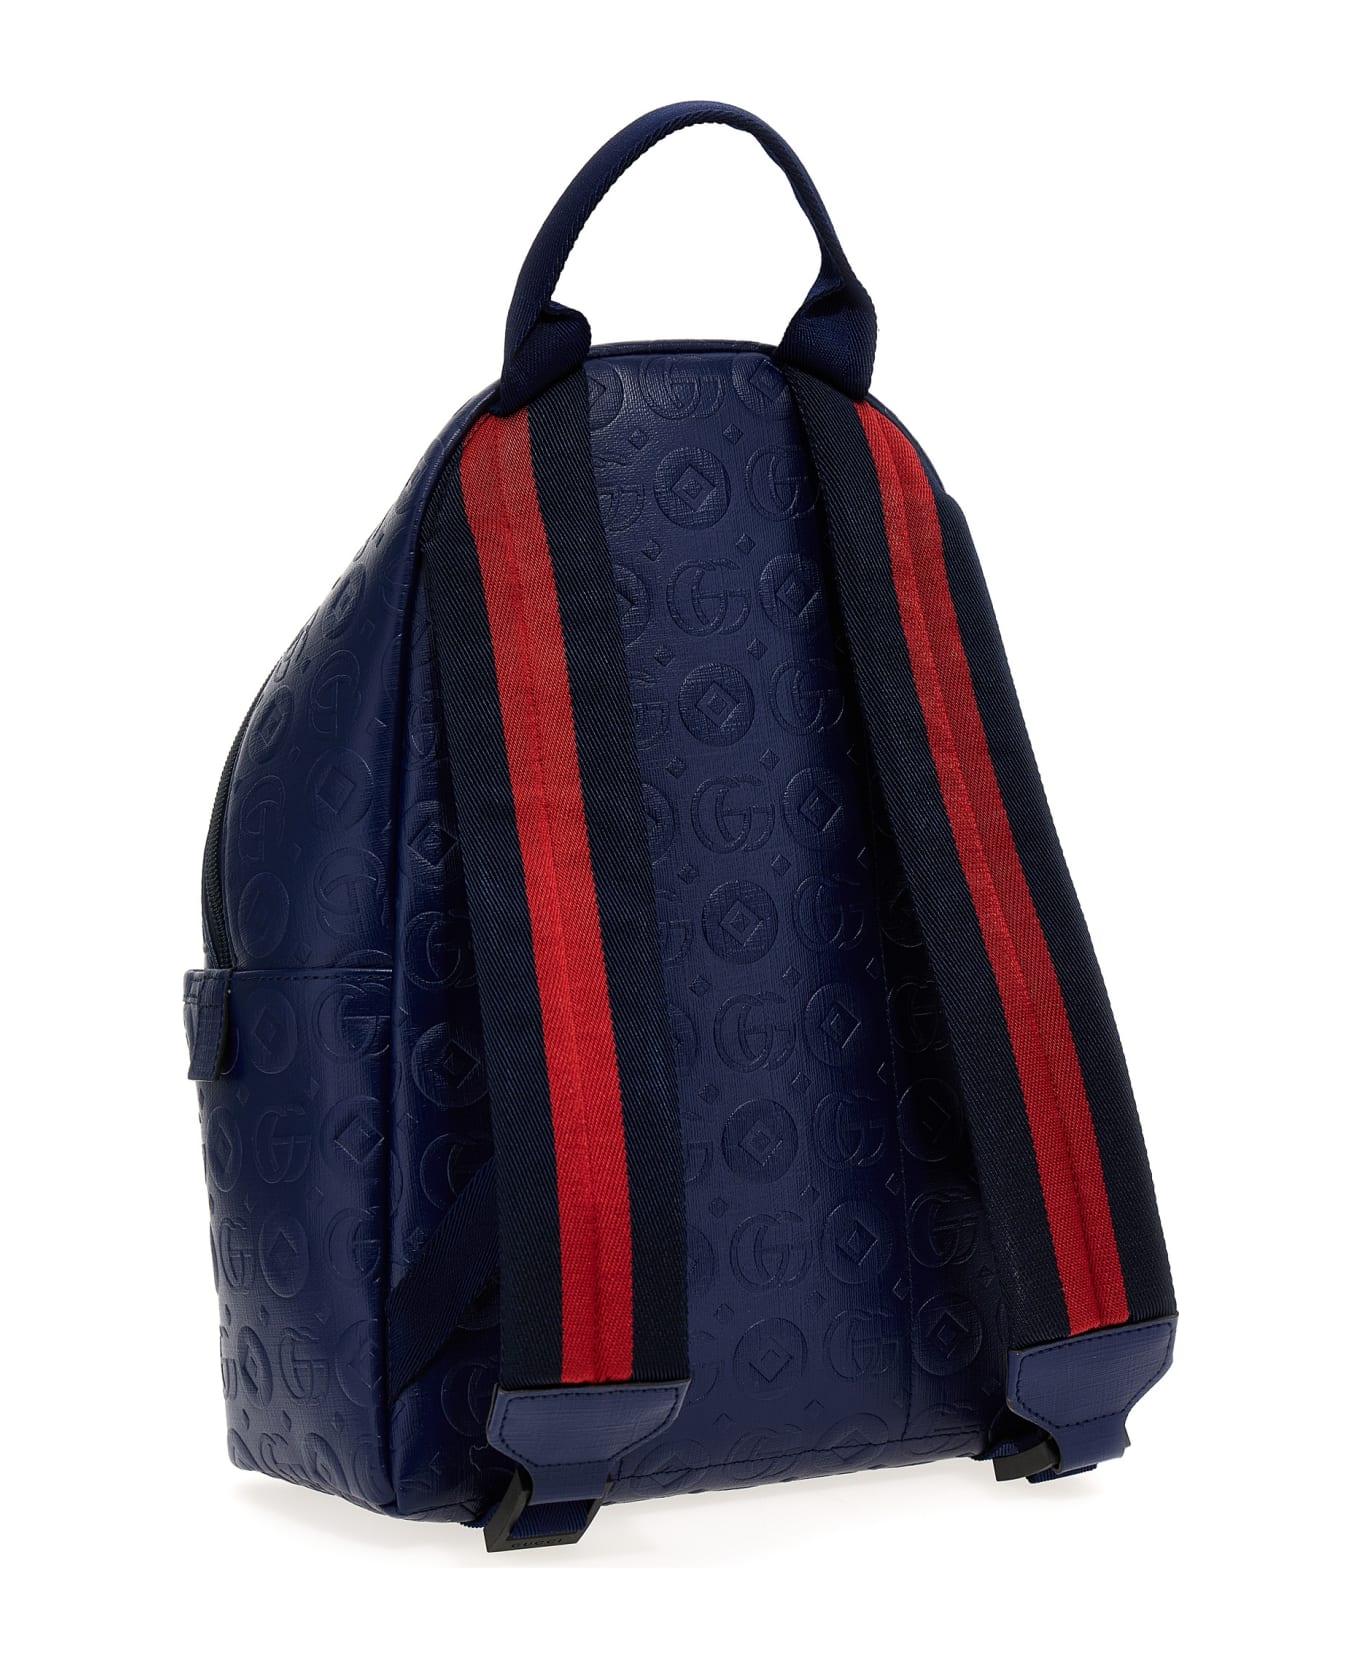 Gucci 'double G' Backpack - NAVY